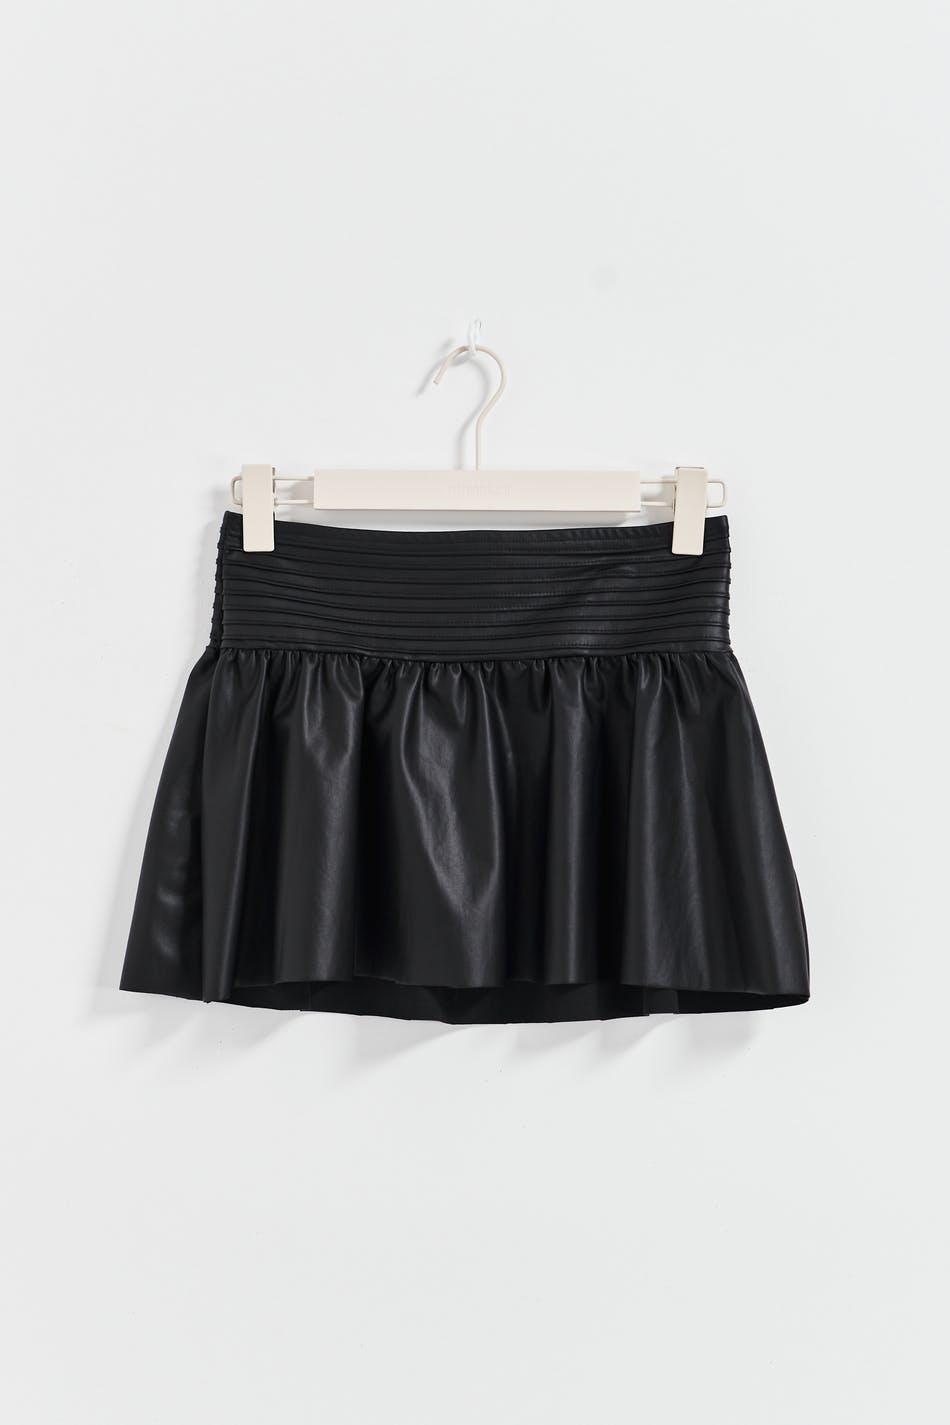  YOOTIKO Black Mini Leather Skirt High Waist Pleated Skater  Skirts Short Sexy Faux Leather Club Wear : Clothing, Shoes & Jewelry